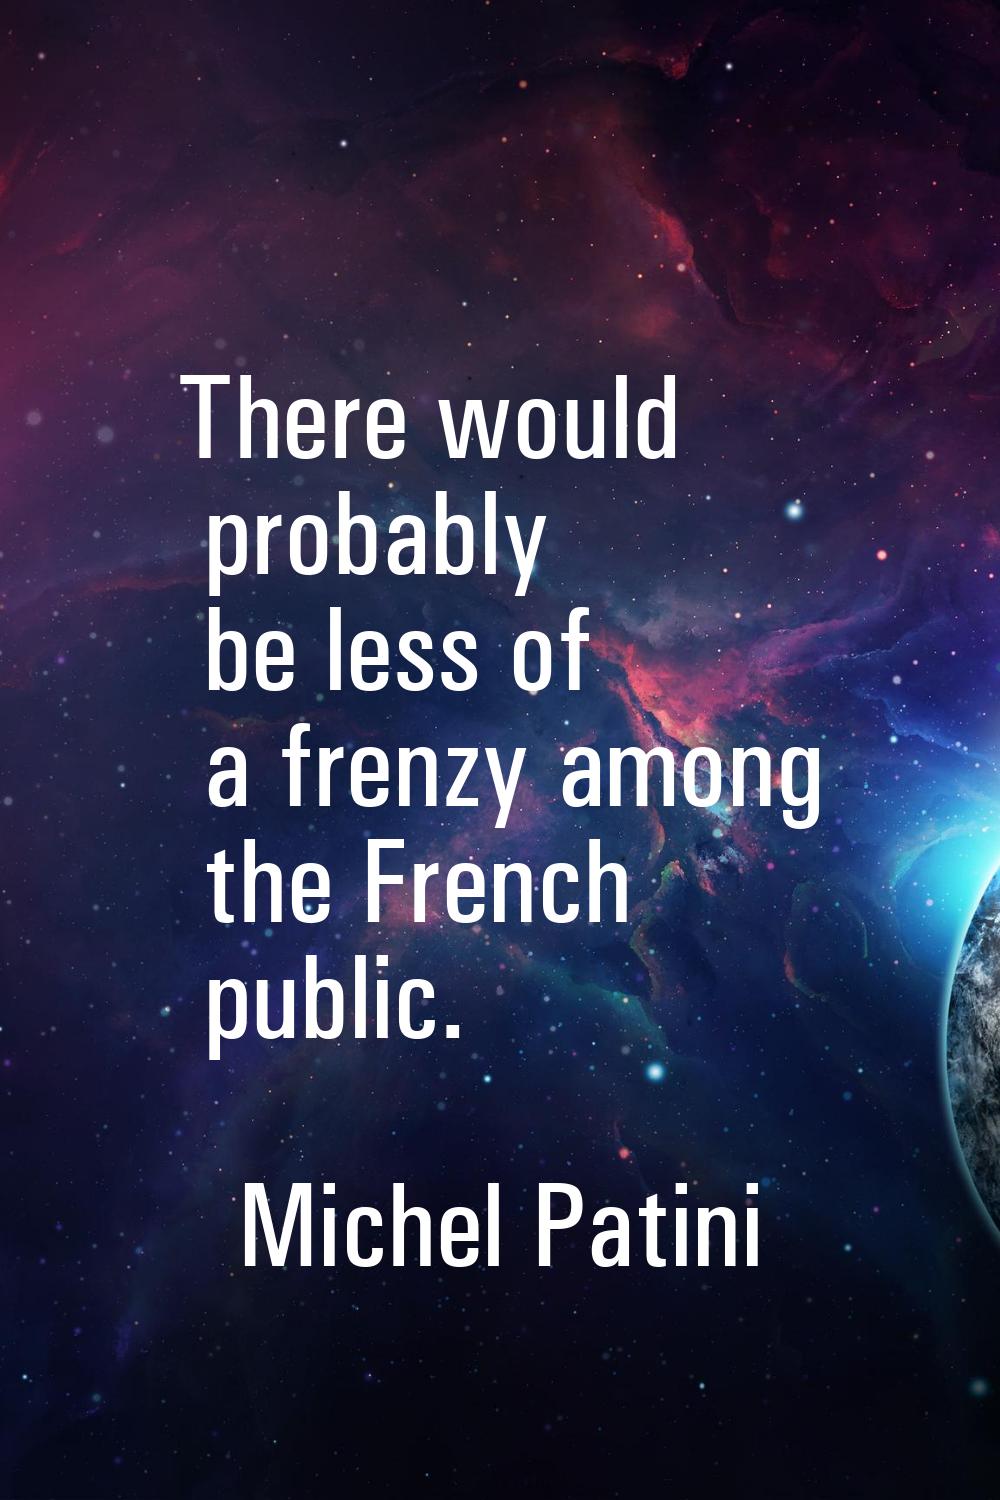 There would probably be less of a frenzy among the French public.